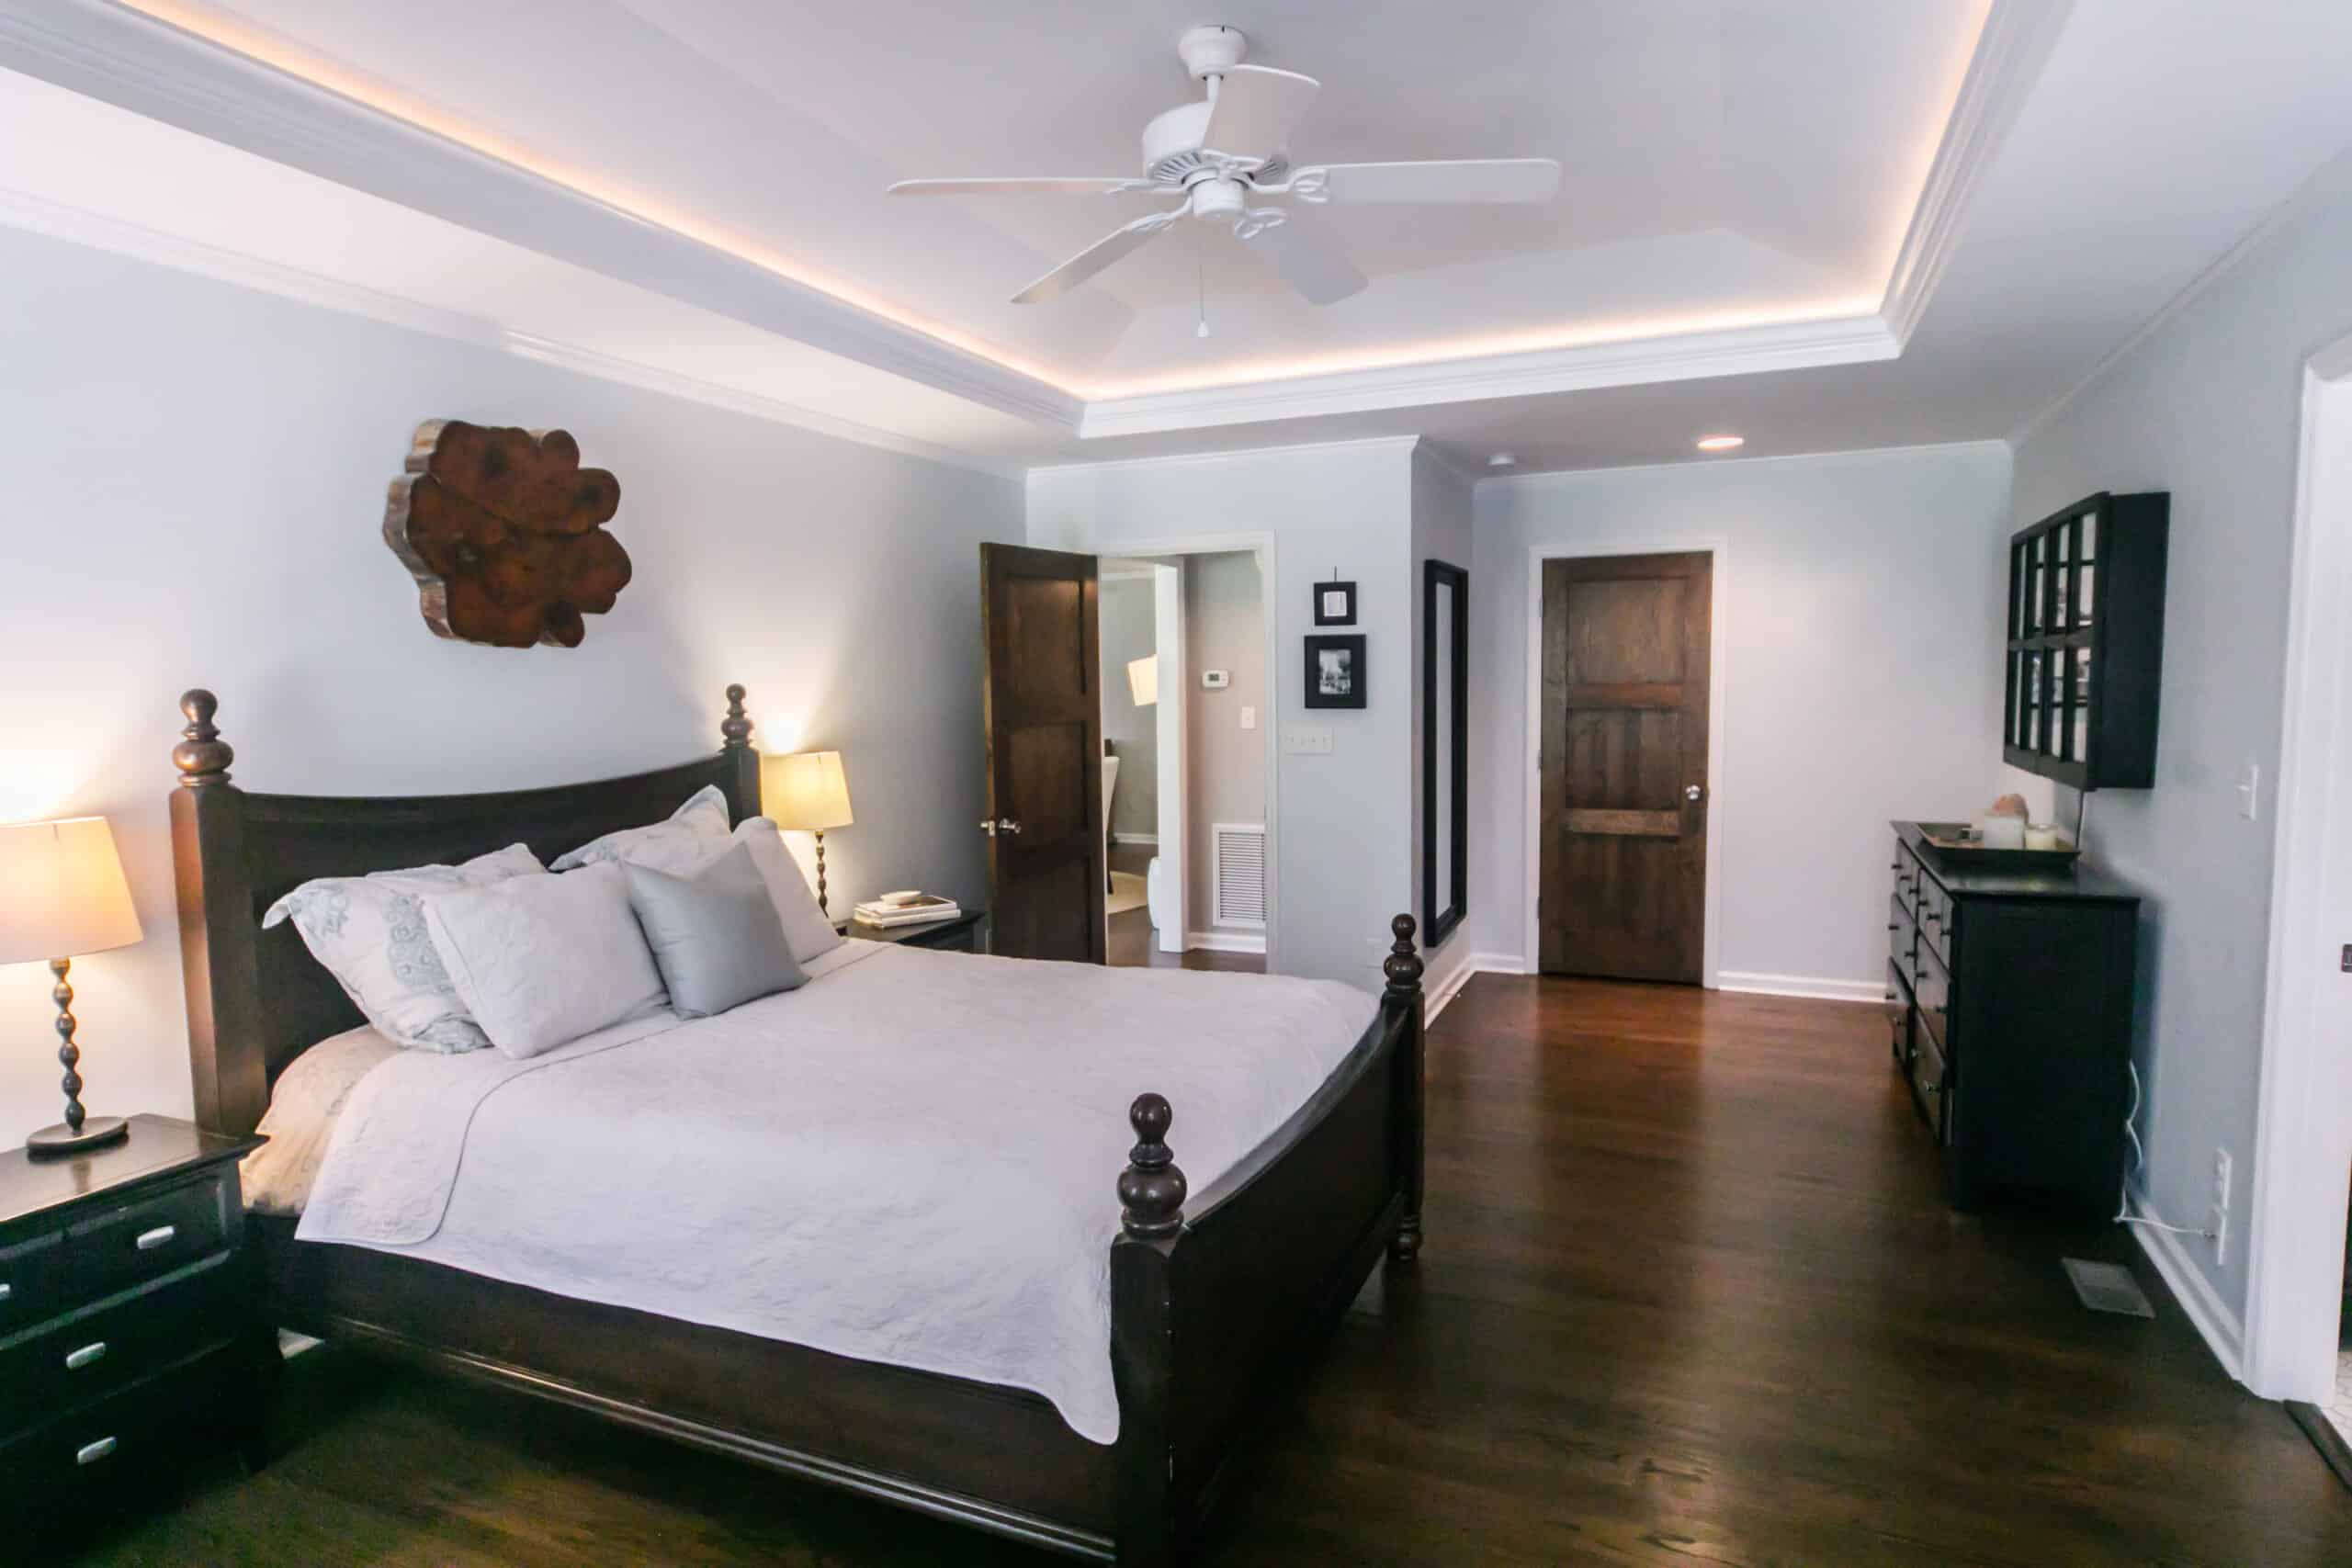 A cleaned master bedroom with king size bed and tray ceilings with uplight